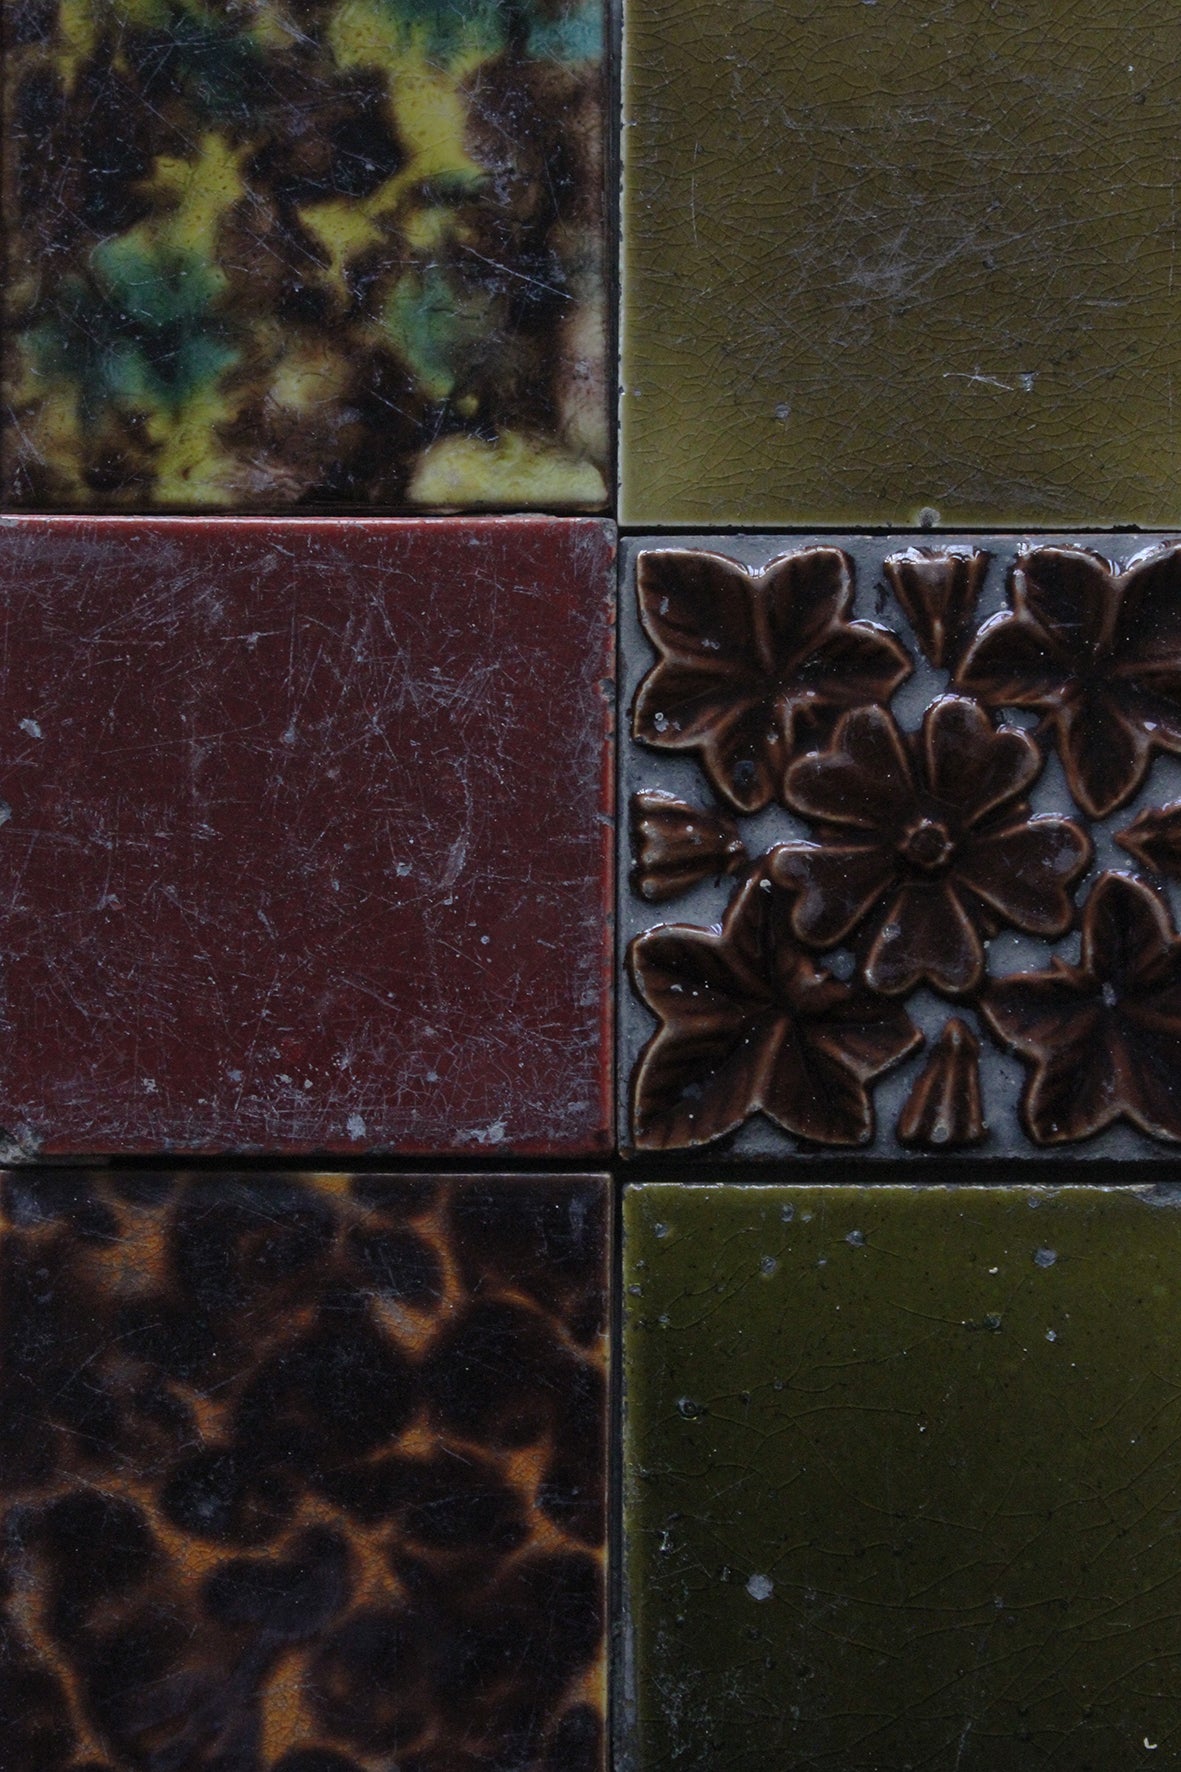 Old Hearth Tiles - Oak Leaves & Textures - Two